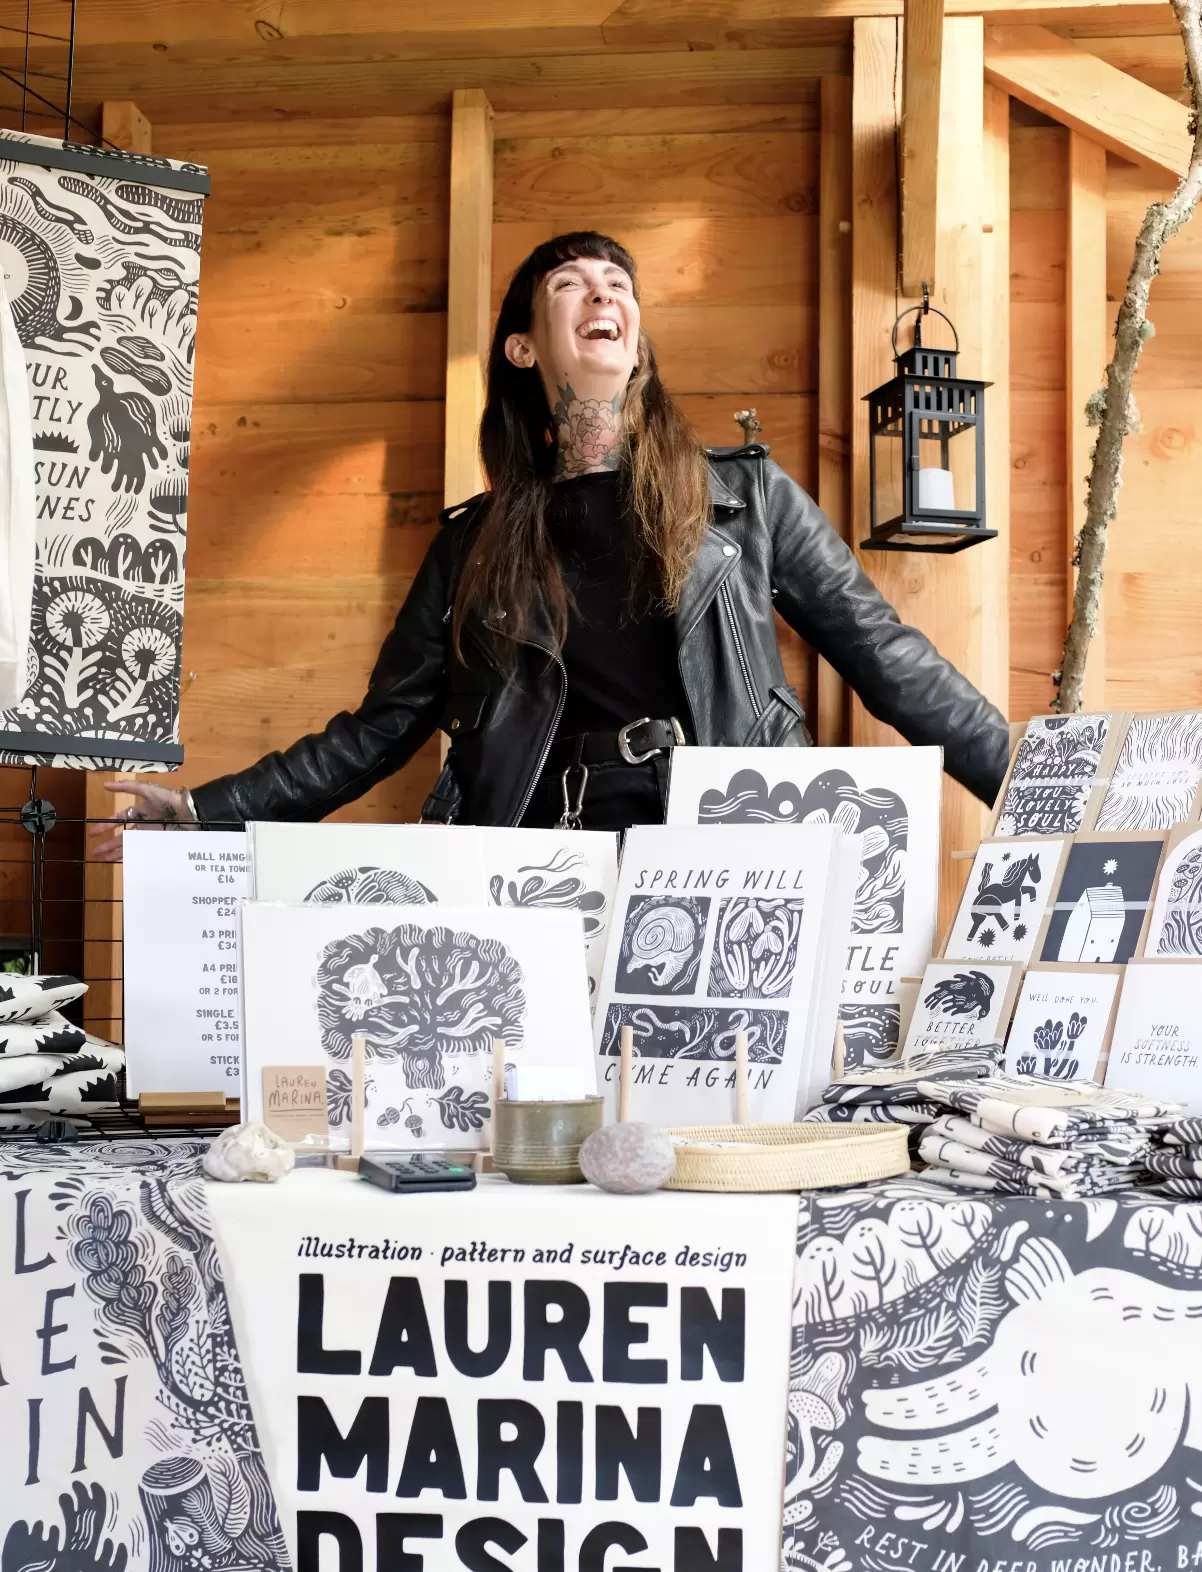 Illustrator Lauren Marina proudly displays her illustrated goods at a local makers market